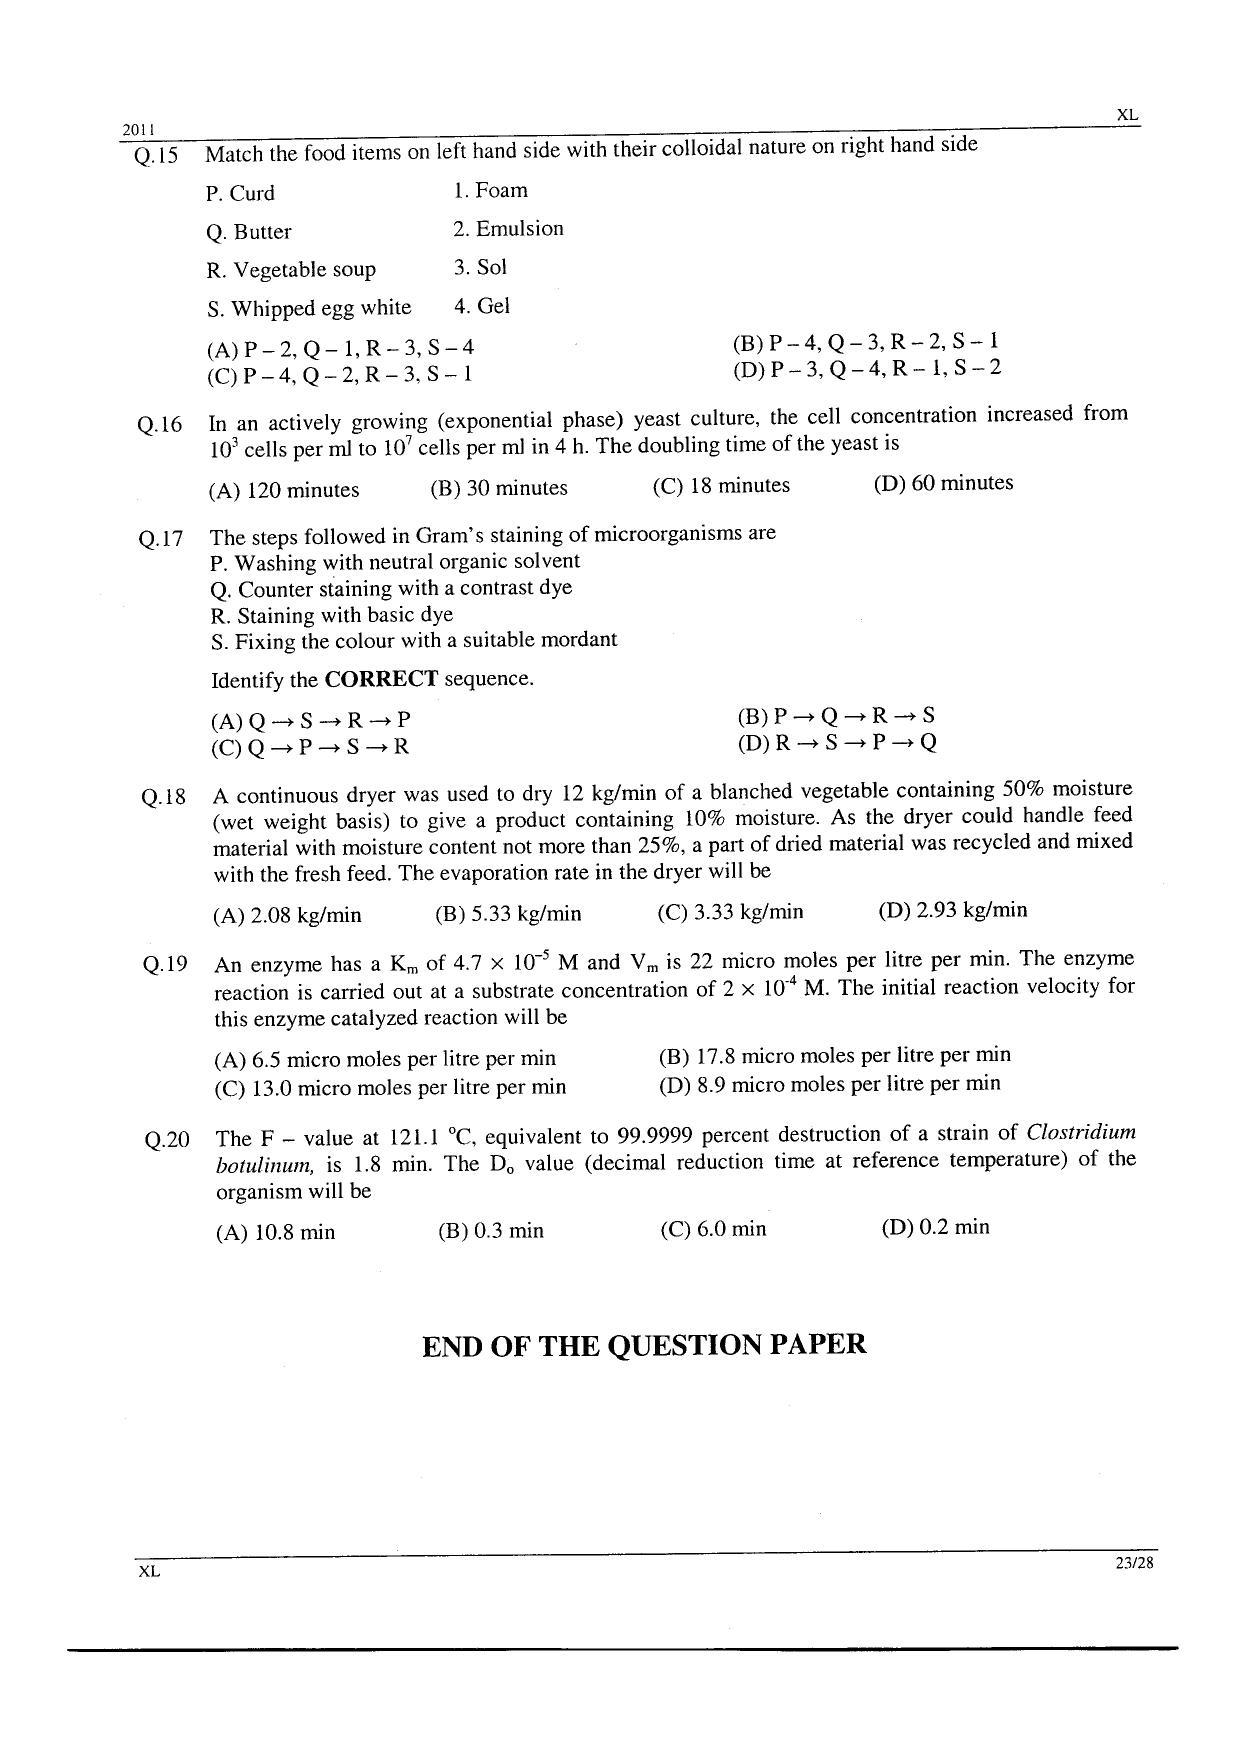 GATE 2011 Life Sciences (XL) Question Paper with Answer Key - Page 23